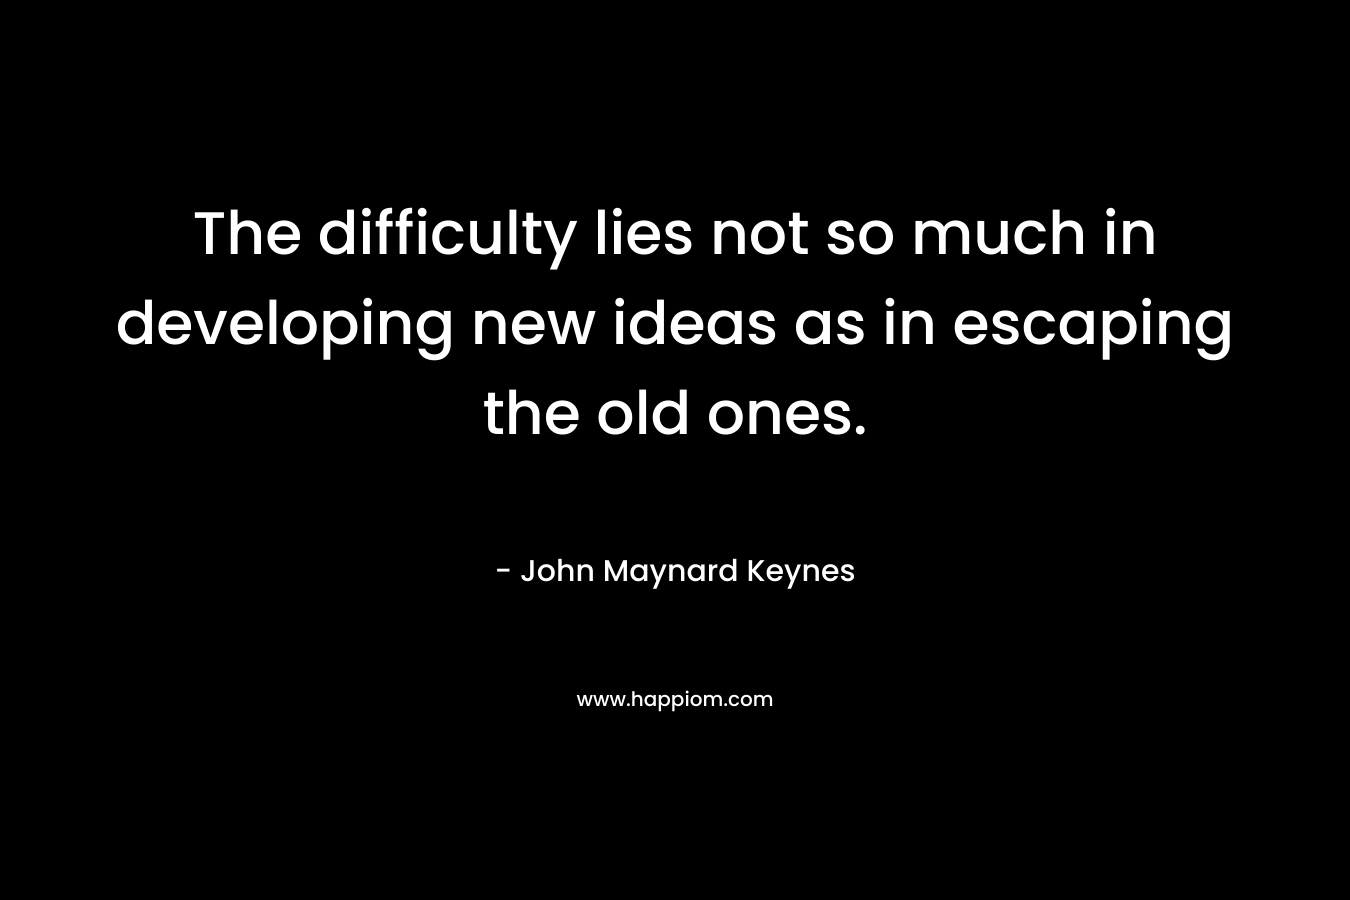 The difficulty lies not so much in developing new ideas as in escaping the old ones. – John Maynard Keynes